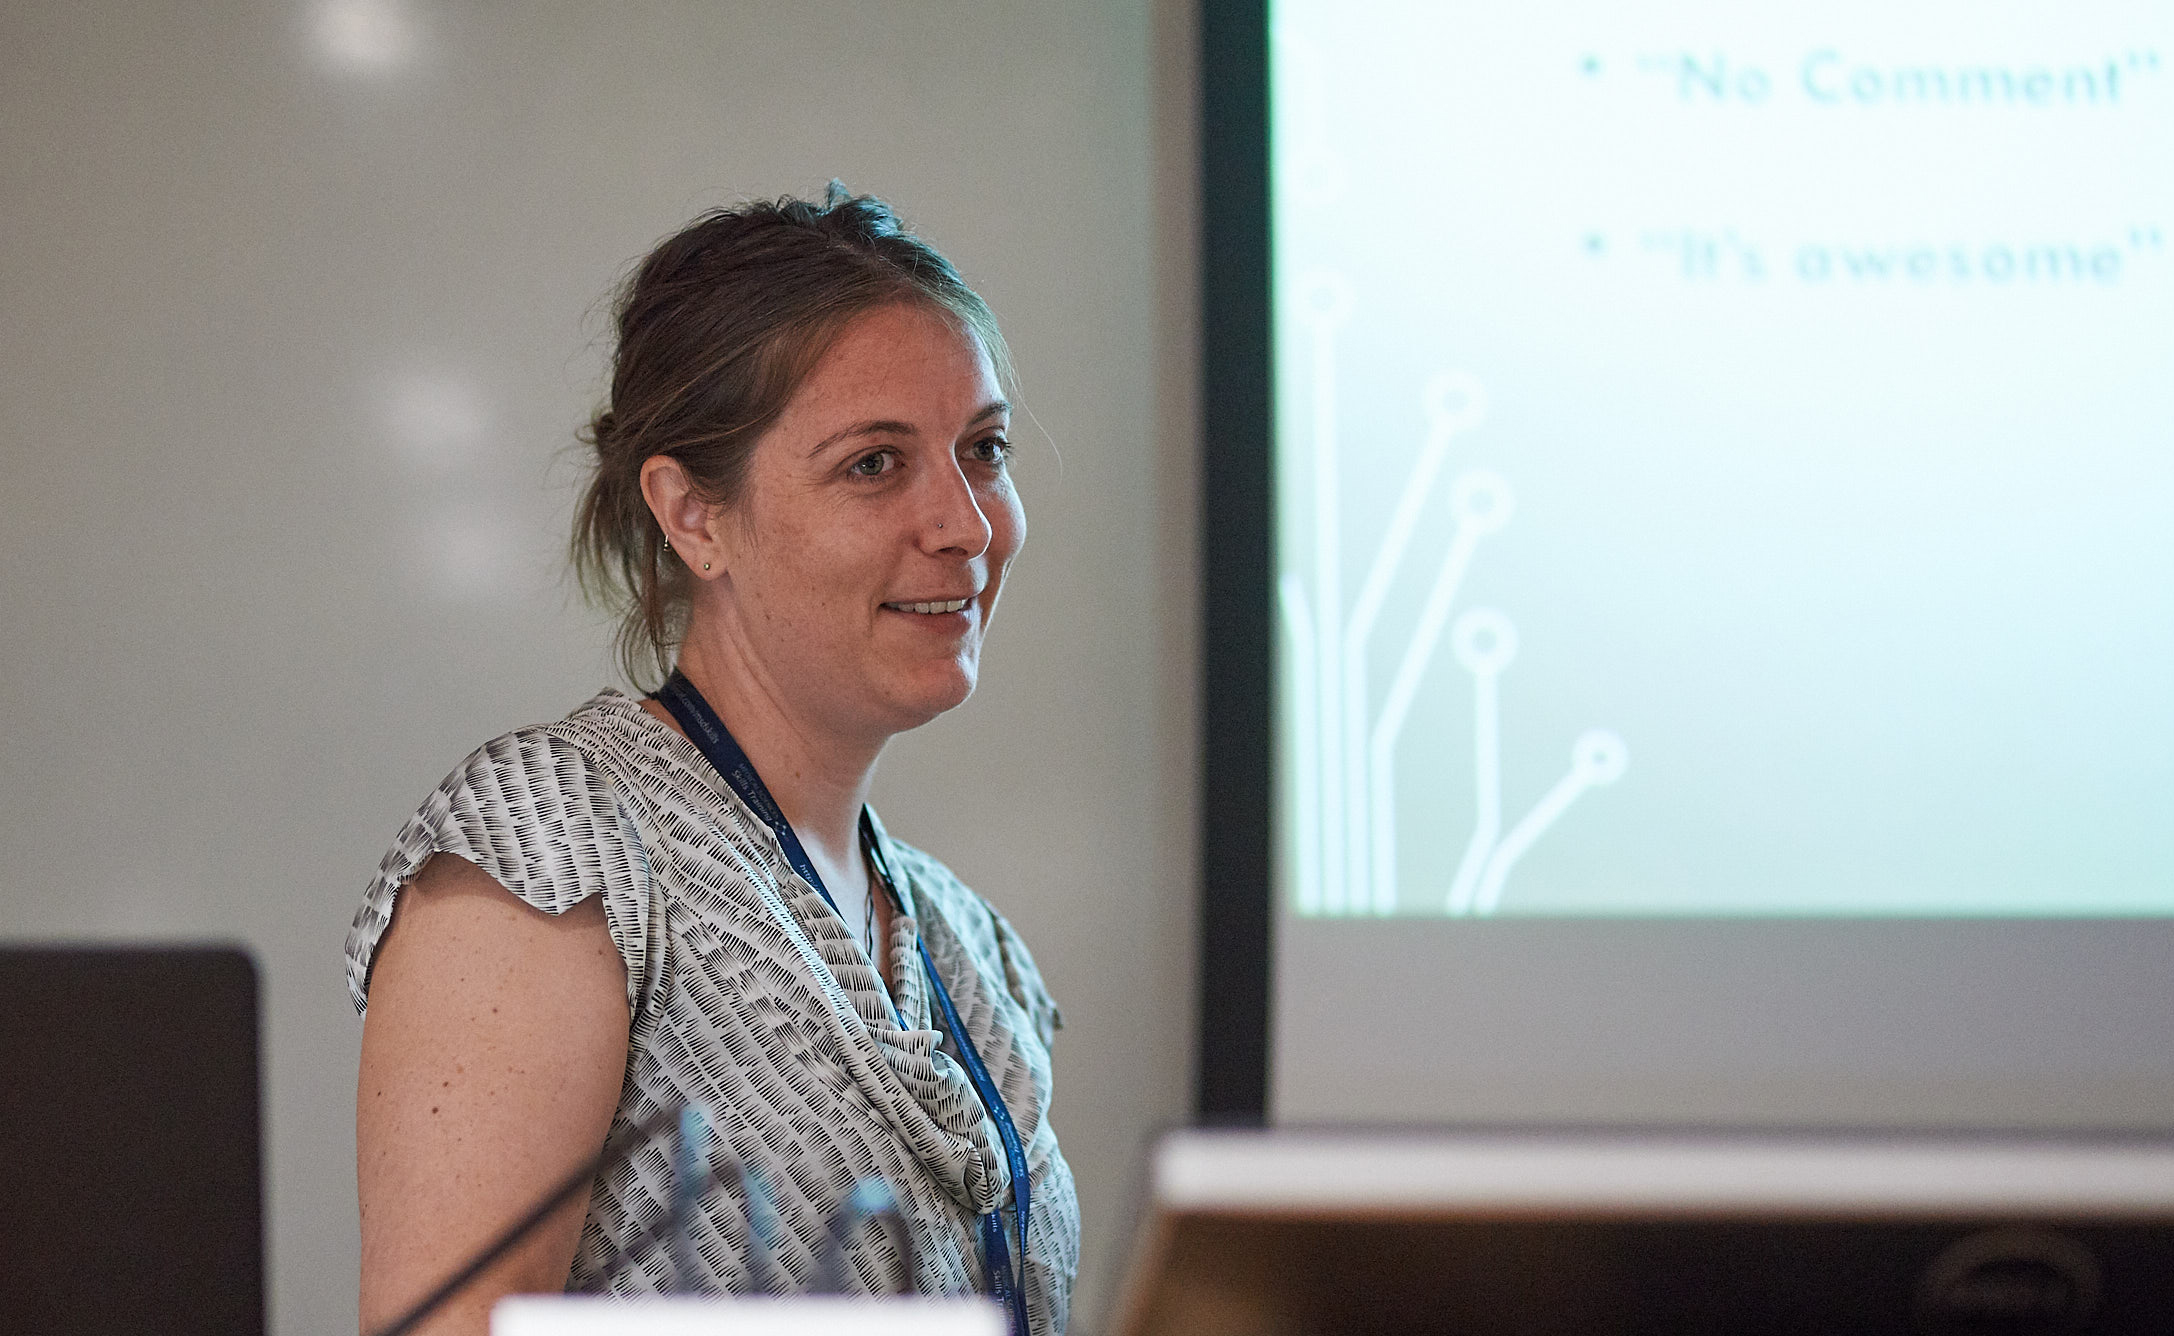 Unit postdoctoral scientist Amy Wolff takes questions from the audience after her presentation on custom-designed approaches to quantifying behaviour.